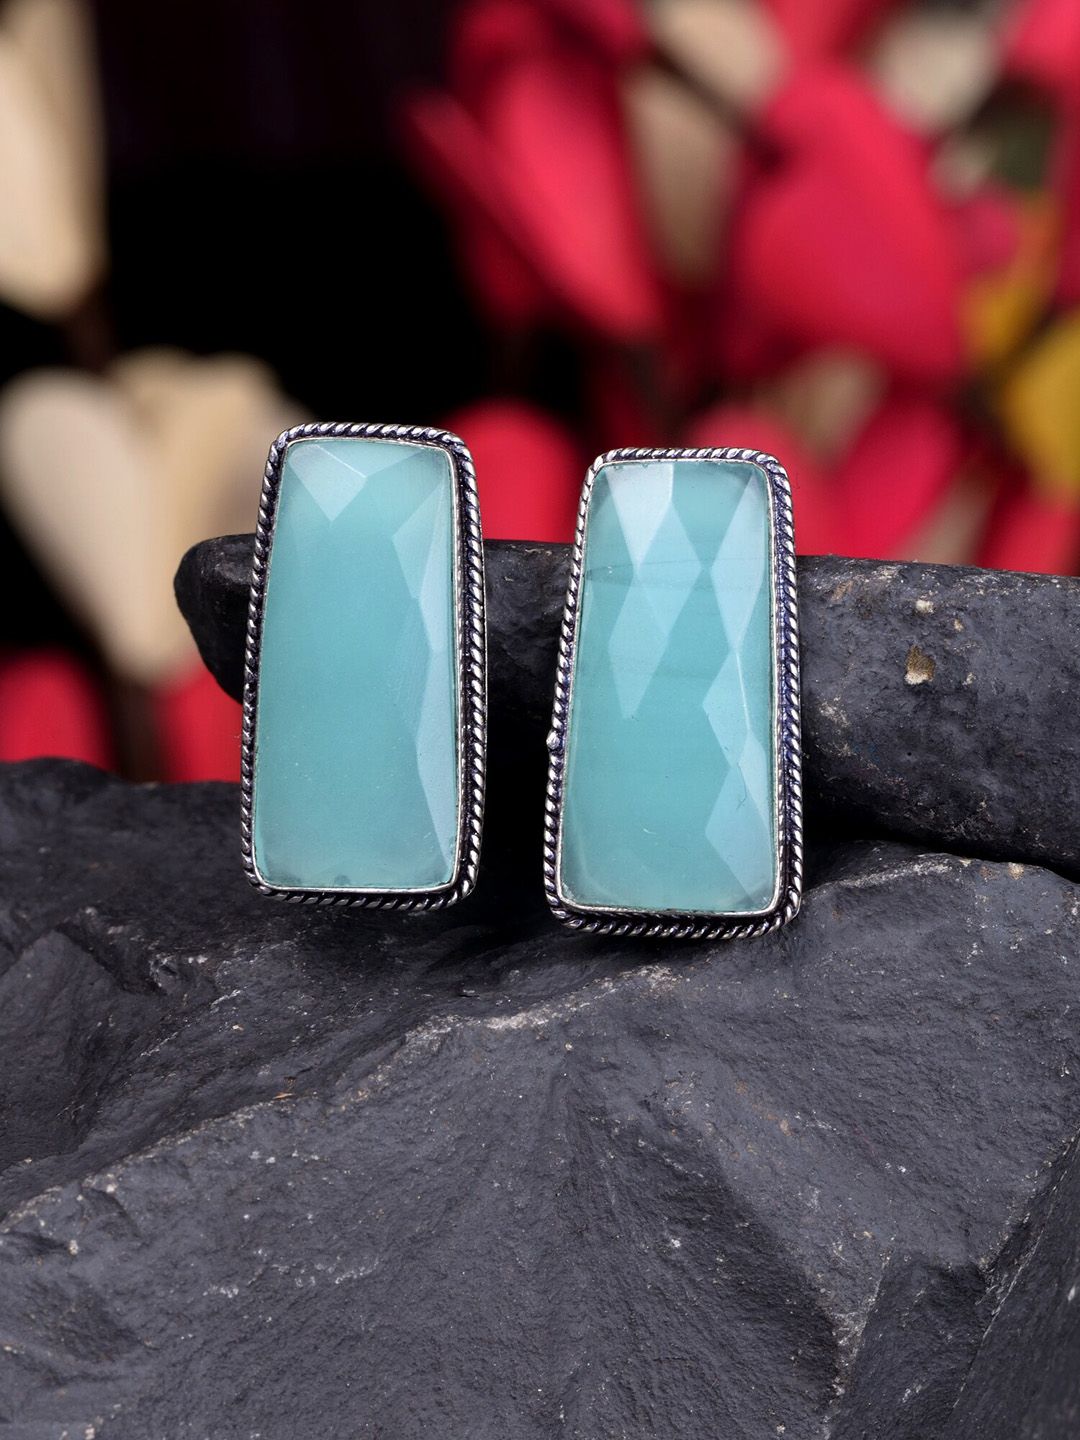 Saraf RS Jewellery Turquoise Blue Geometric Studs Earrings Price in India